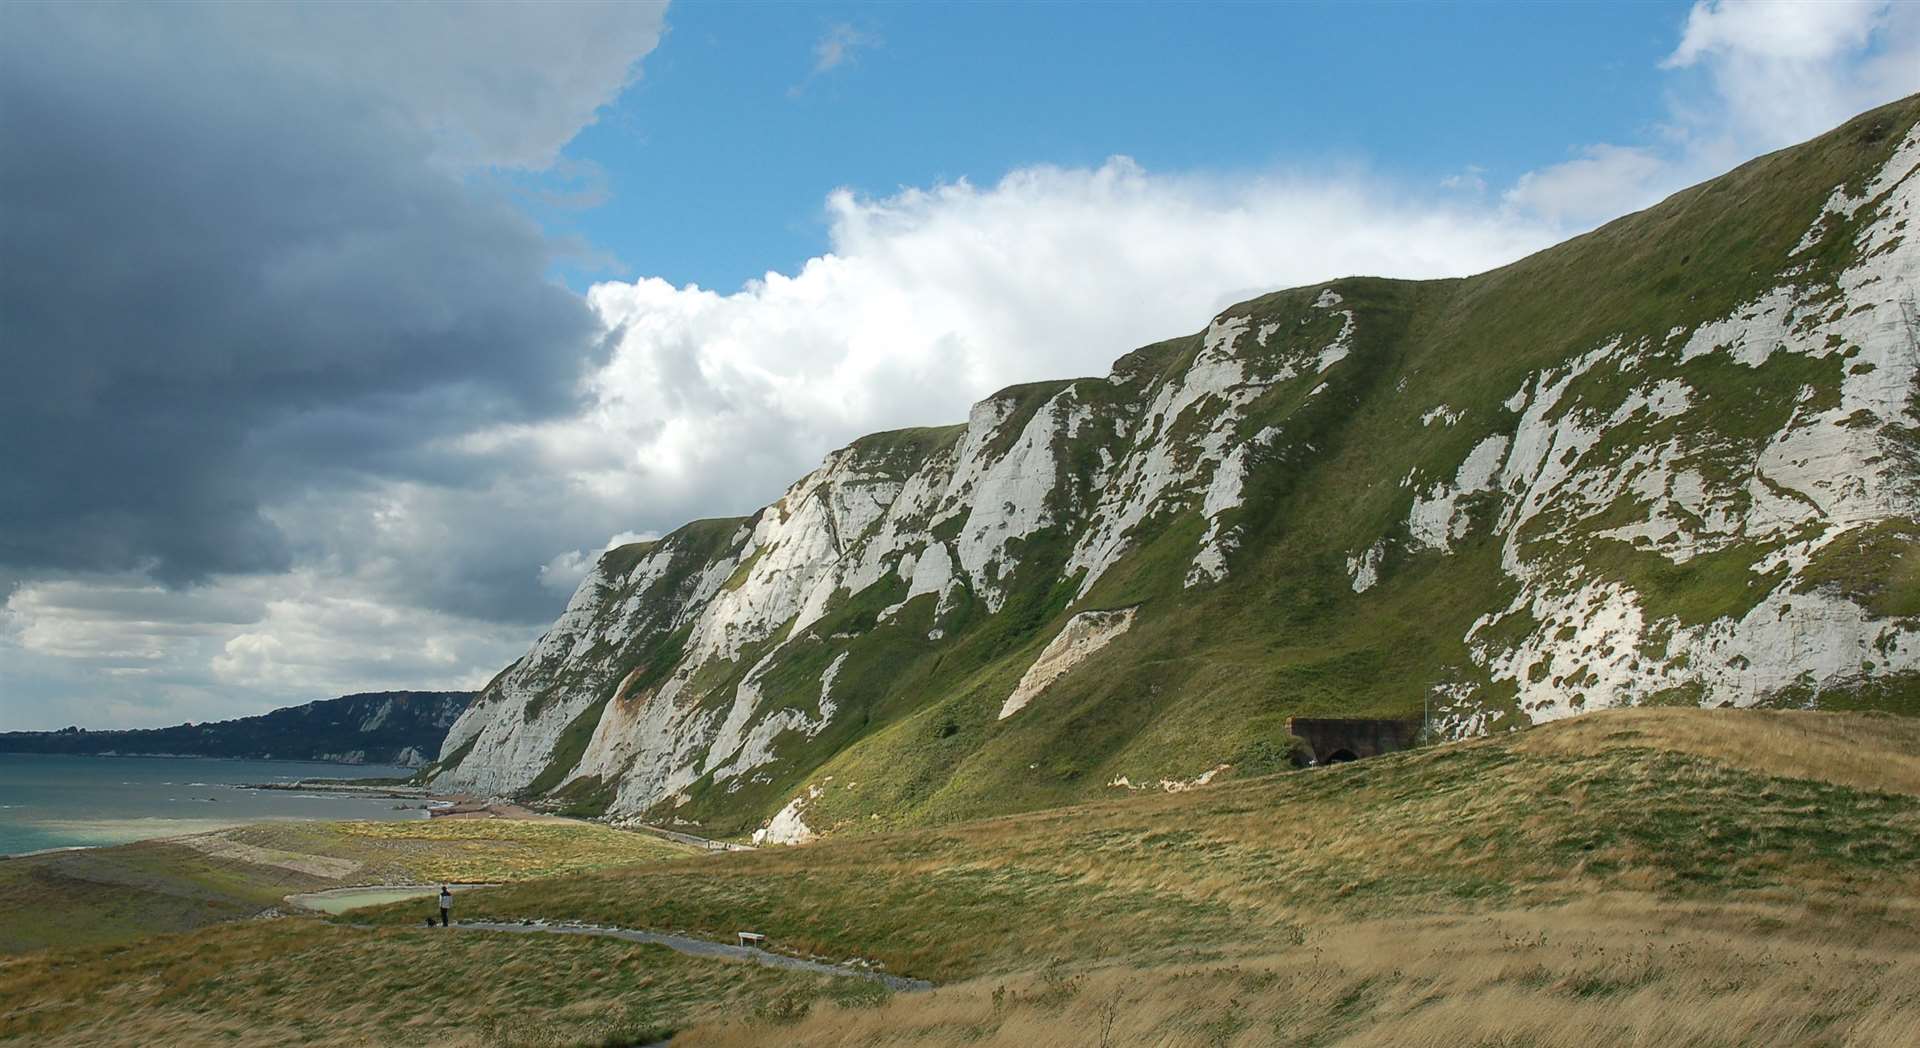 Stroll below the famous white cliffs at Samphire Hoe